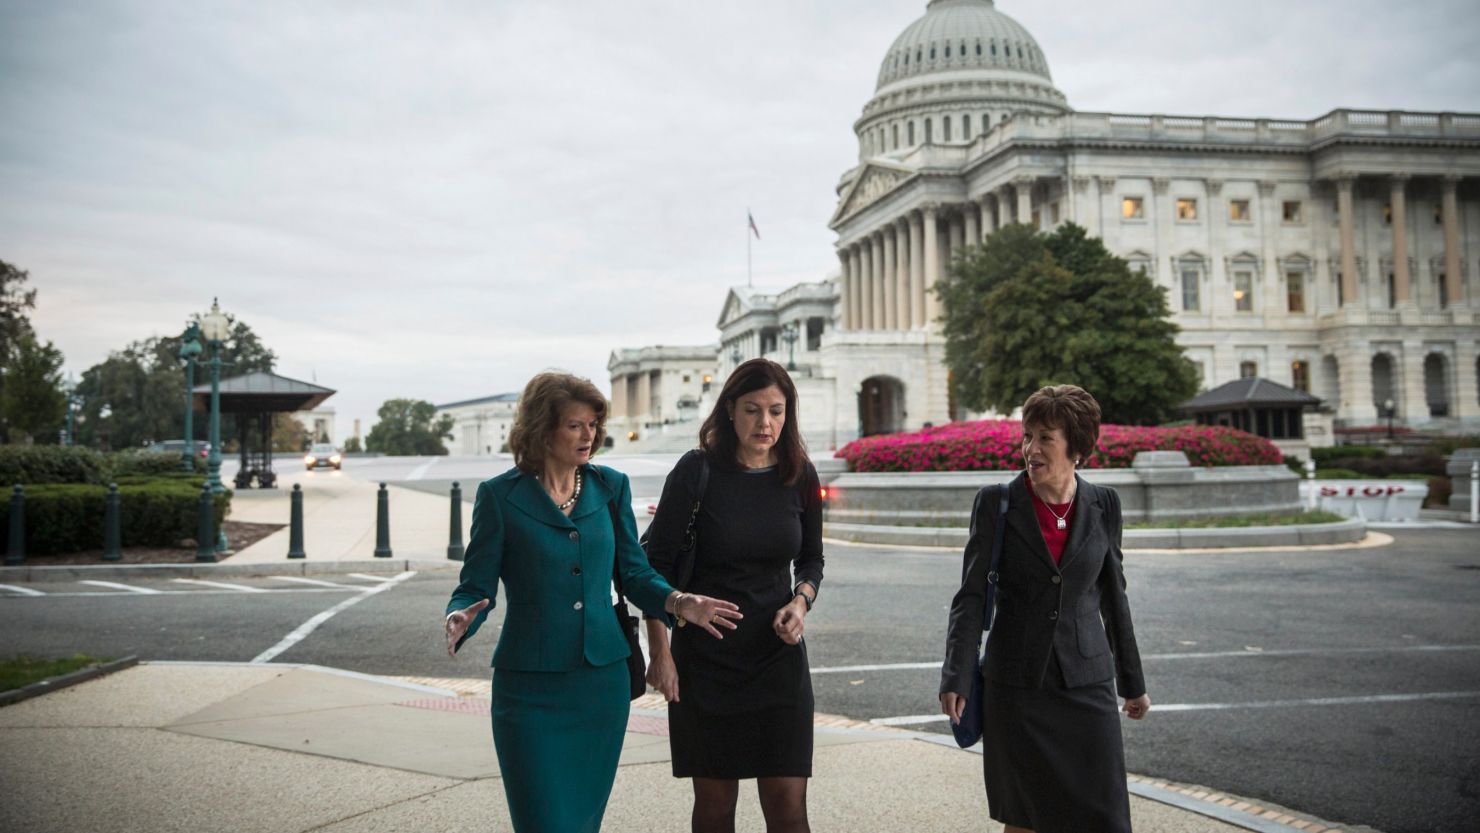 Sens. Murkowski, Ayotte, and Collins walked together through Capitol Hill Wednesday as news of a Senate deal was imminent.